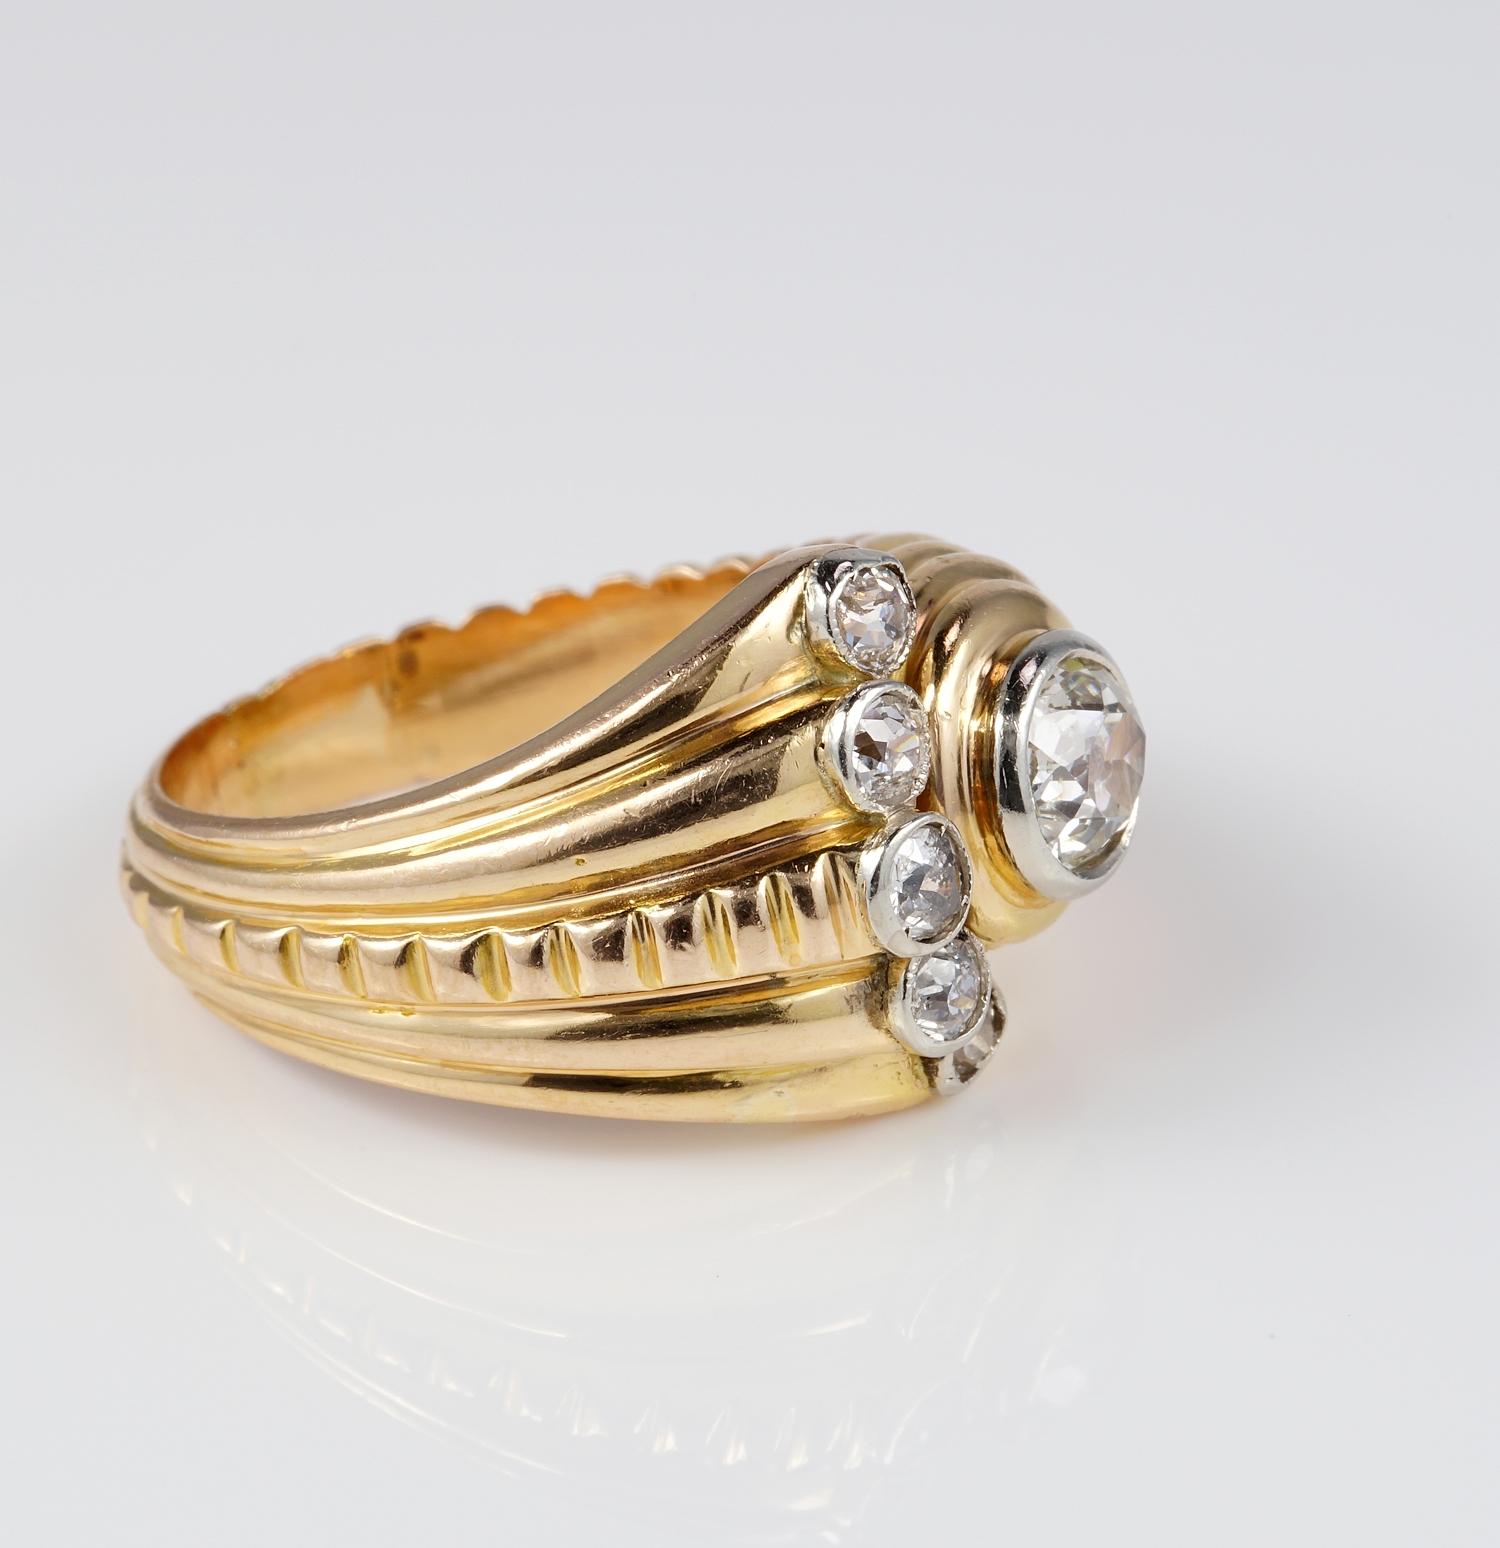 Tourbillon Ring 

Retro era jewellery stands-out for big, bold shapes and high glamour of dramatic impact
Iconic style of Hollywood glamour Golden Age signature, the retro style will ever stands out as statement jewellery
This magnificent retro ring